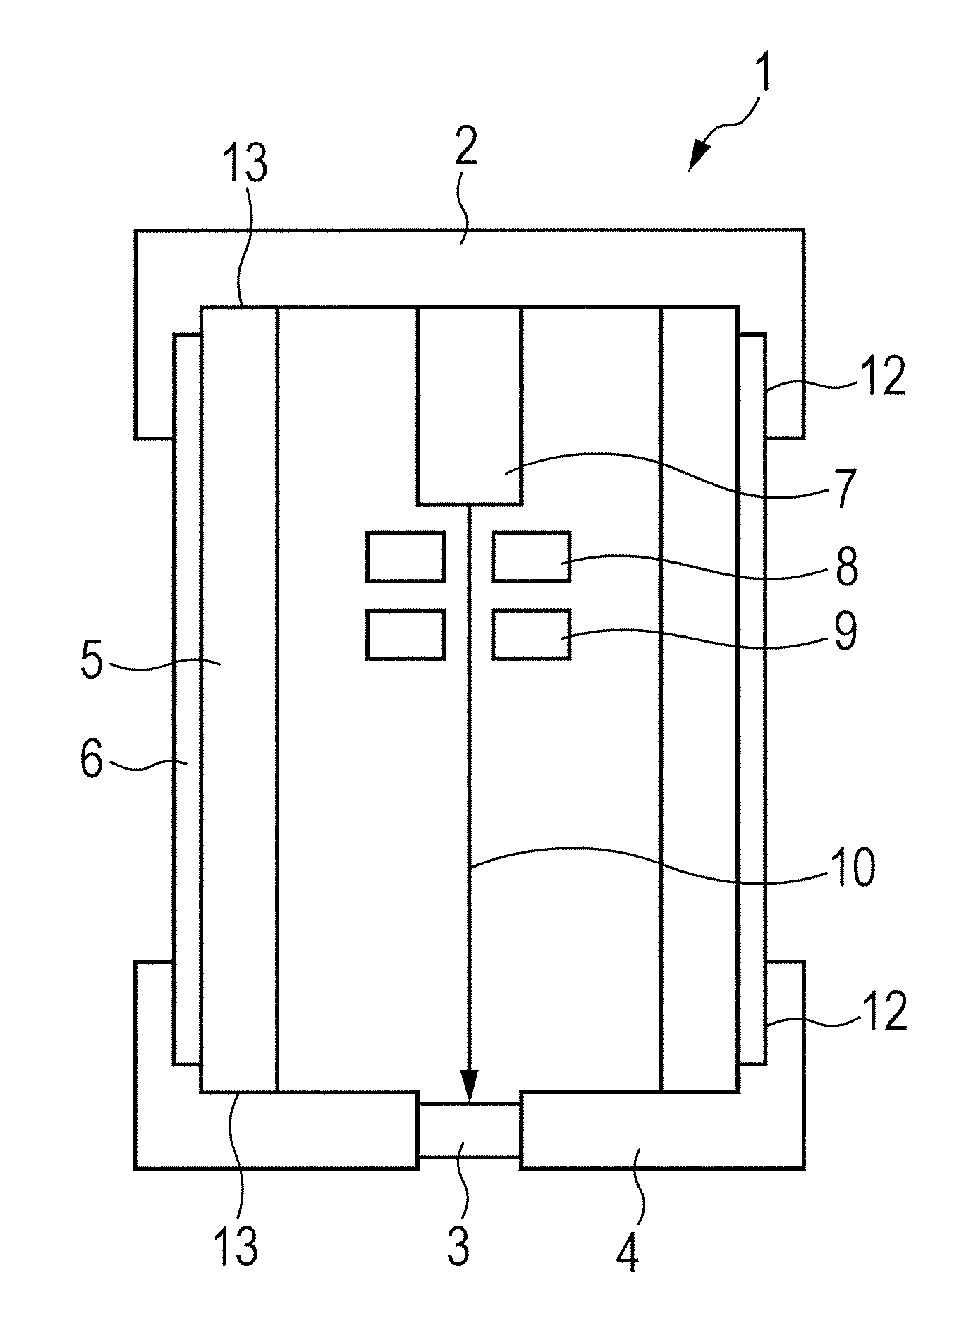 X-ray generating tube, x-ray generating apparatus and x-ray imaging system using the same